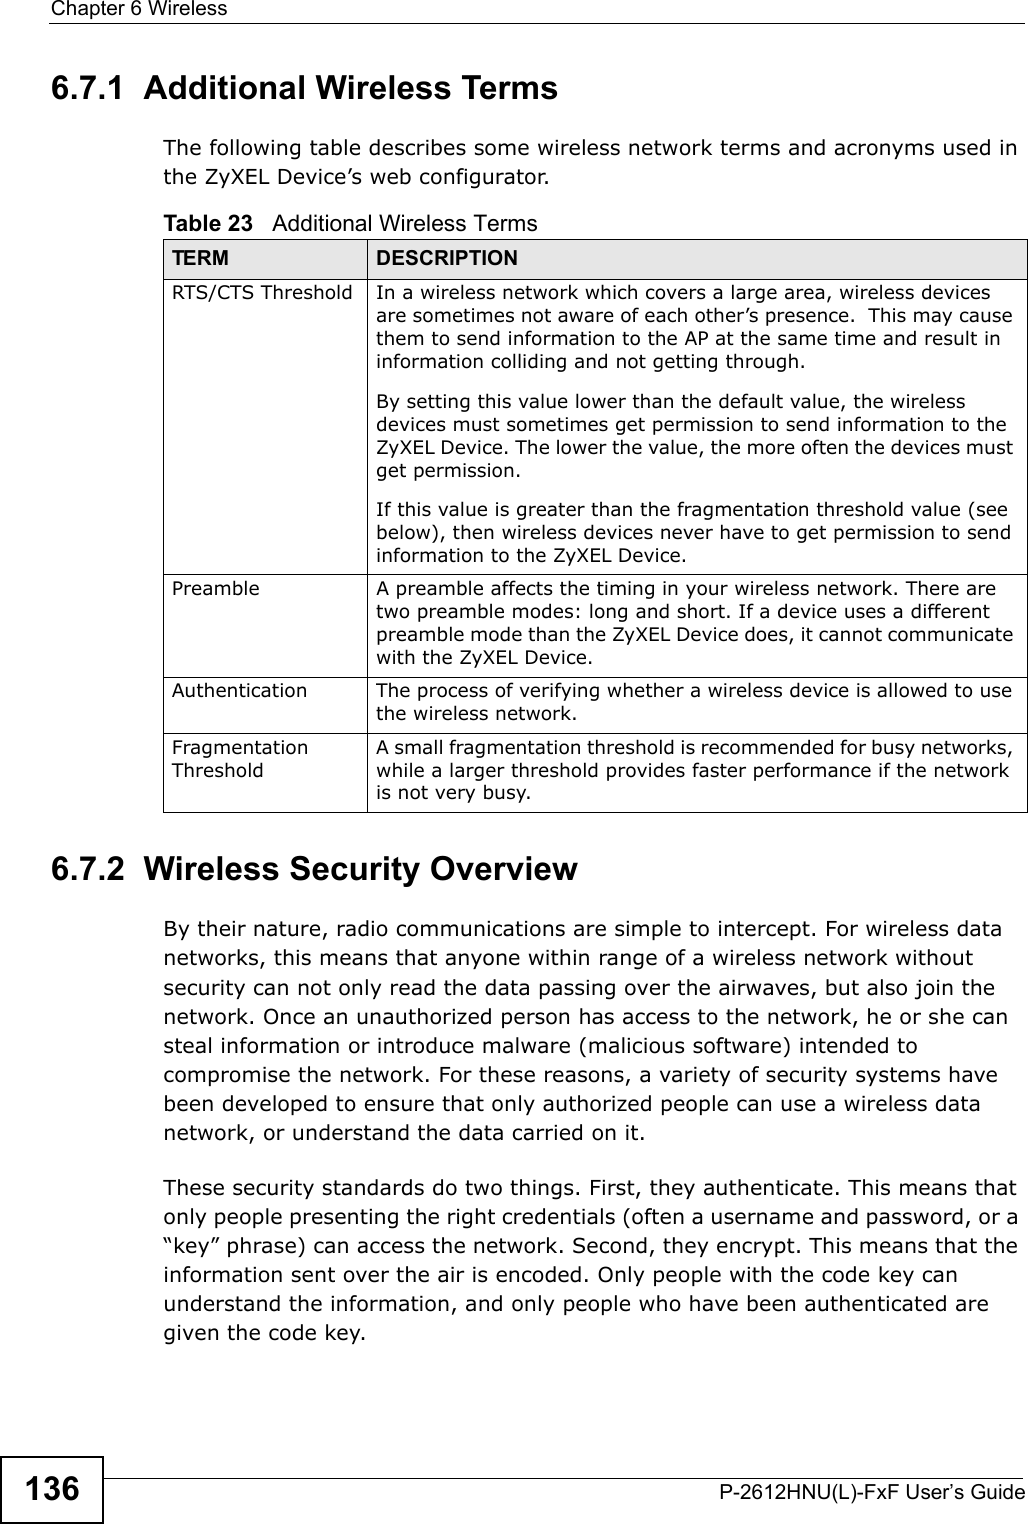 Chapter 6 WirelessP-2612HNU(L)-FxF User’s Guide1366.7.1  Additional Wireless TermsThe following table describes some wireless network terms and acronyms used in the ZyXEL Device’s web configurator.6.7.2  Wireless Security OverviewBy their nature, radio communications are simple to intercept. For wireless data networks, this means that anyone within range of a wireless network without security can not only read the data passing over the airwaves, but also join the network. Once an unauthorized person has access to the network, he or she can steal information or introduce malware (malicious software) intended to compromise the network. For these reasons, a variety of security systems havebeen developed to ensure that only authorized people can use a wireless datanetwork, or understand the data carried on it.These security standards do two things. First, they authenticate. This means that only people presenting the right credentials (often a username and password, or a “key” phrase) can access the network. Second, they encrypt. This means that the information sent over the air is encoded. Only people with the code key can understand the information, and only people who have been authenticated are given the code key.Table 23   Additional Wireless TermsTERM DESCRIPTIONRTS/CTS Threshold In a wireless network which covers a large area, wireless devices are sometimes not aware of each other’s presence.  This may cause them to send information to the AP at the same time and result ininformation colliding and not getting through.By setting this value lower than the default value, the wireless devices must sometimes get permission to send information to theZyXEL Device. The lower the value, the more often the devices must get permission.If this value is greater than the fragmentation threshold value (see below), then wireless devices never have to get permission to send information to the ZyXEL Device.Preamble A preamble affects the timing in your wireless network. There aretwo preamble modes: long and short. If a device uses a different preamble mode than the ZyXEL Device does, it cannot communicate with the ZyXEL Device.Authentication The process of verifying whether a wireless device is allowed to use the wireless network.Fragmentation ThresholdA small fragmentation threshold is recommended for busy networks, while a larger threshold provides faster performance if the network is not very busy.